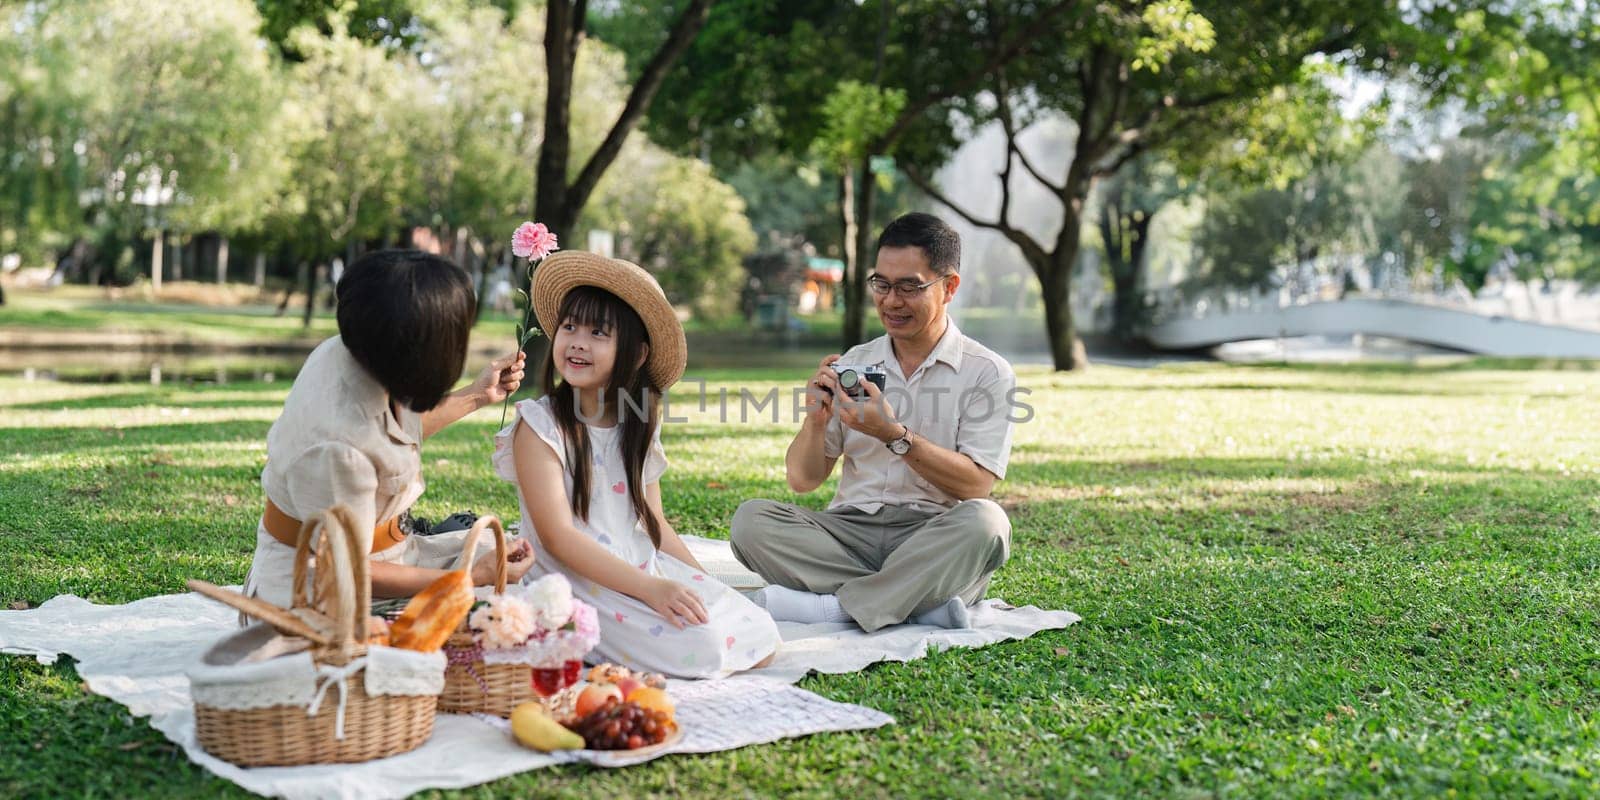 Family day, family picnic together at the park. Retired grandparent take granddaughter to relax and spend time together at the park.